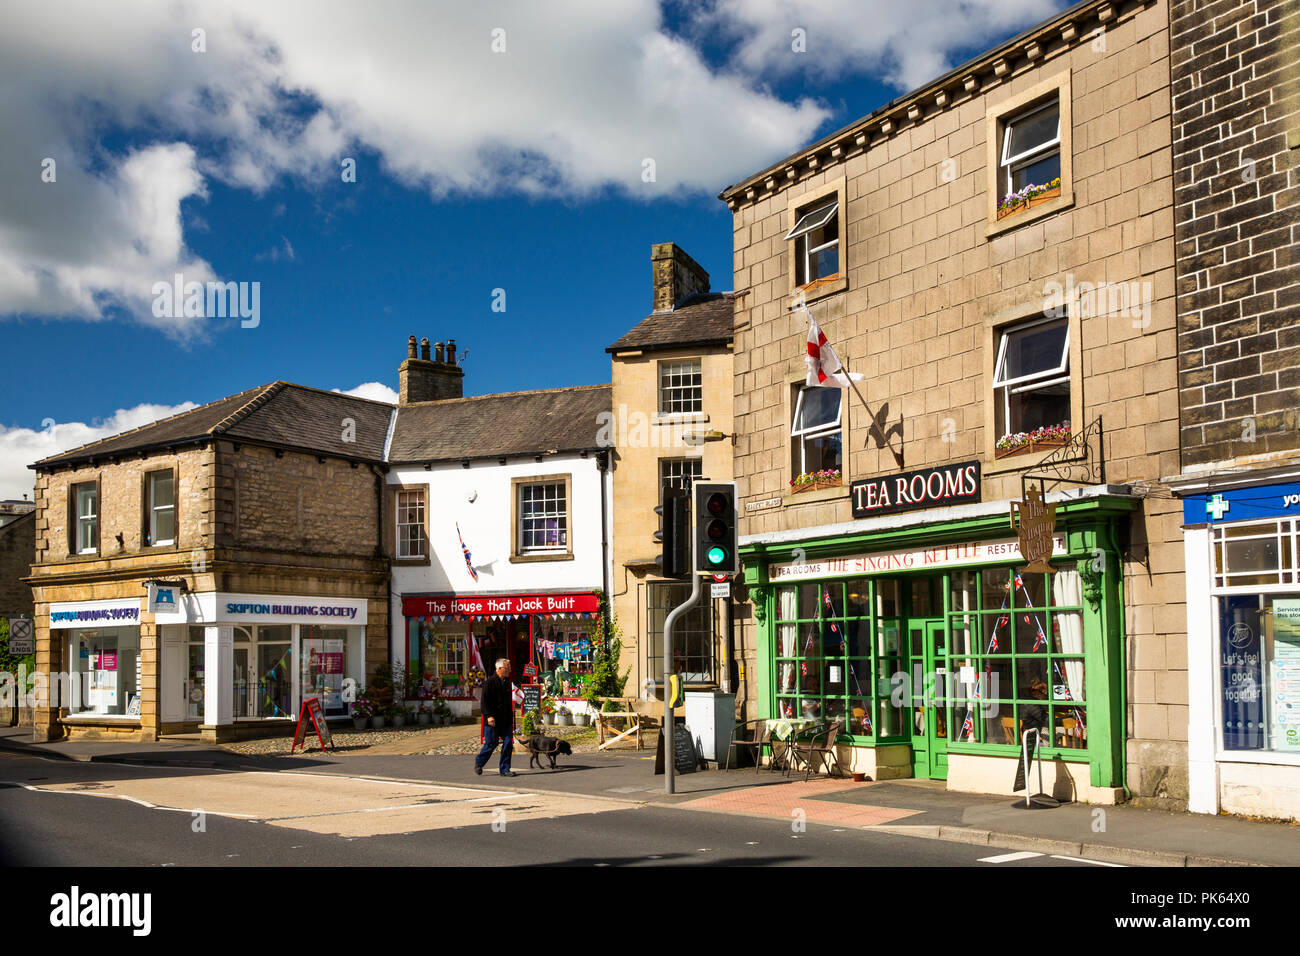 UK, Yorkshire, Settle, Market Place, Skipton Building Society, shops and tea room Stock Photo